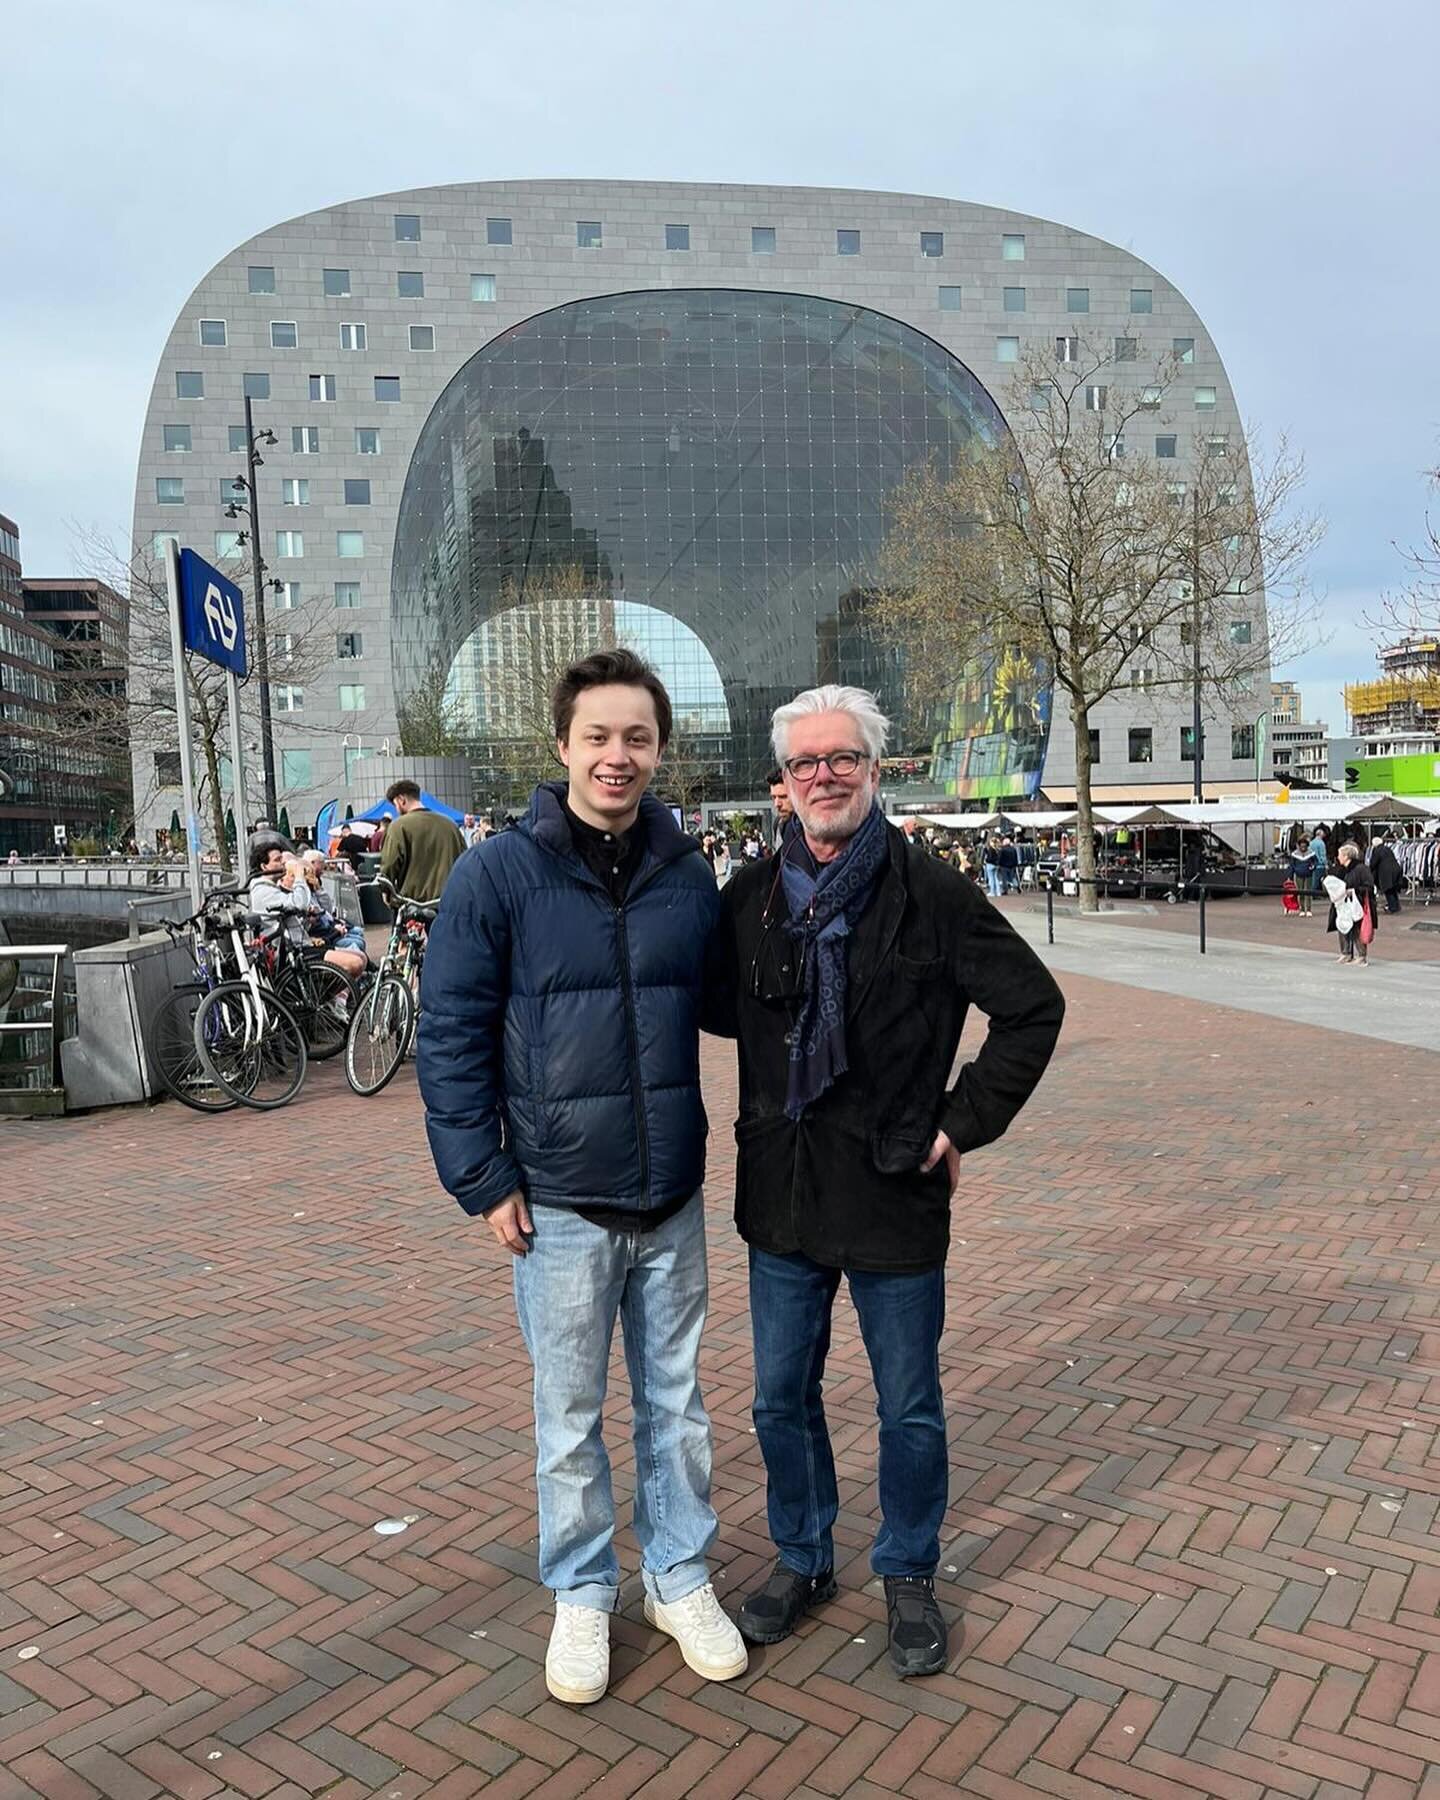 Sunny morning walk with @___johan after the first concert in Rotterdam. Second concert with Brahms Violin Concerto and Bruckner 7 with the @rotterdamphilharmonic this afternoon.
📸: @dorranalibaud